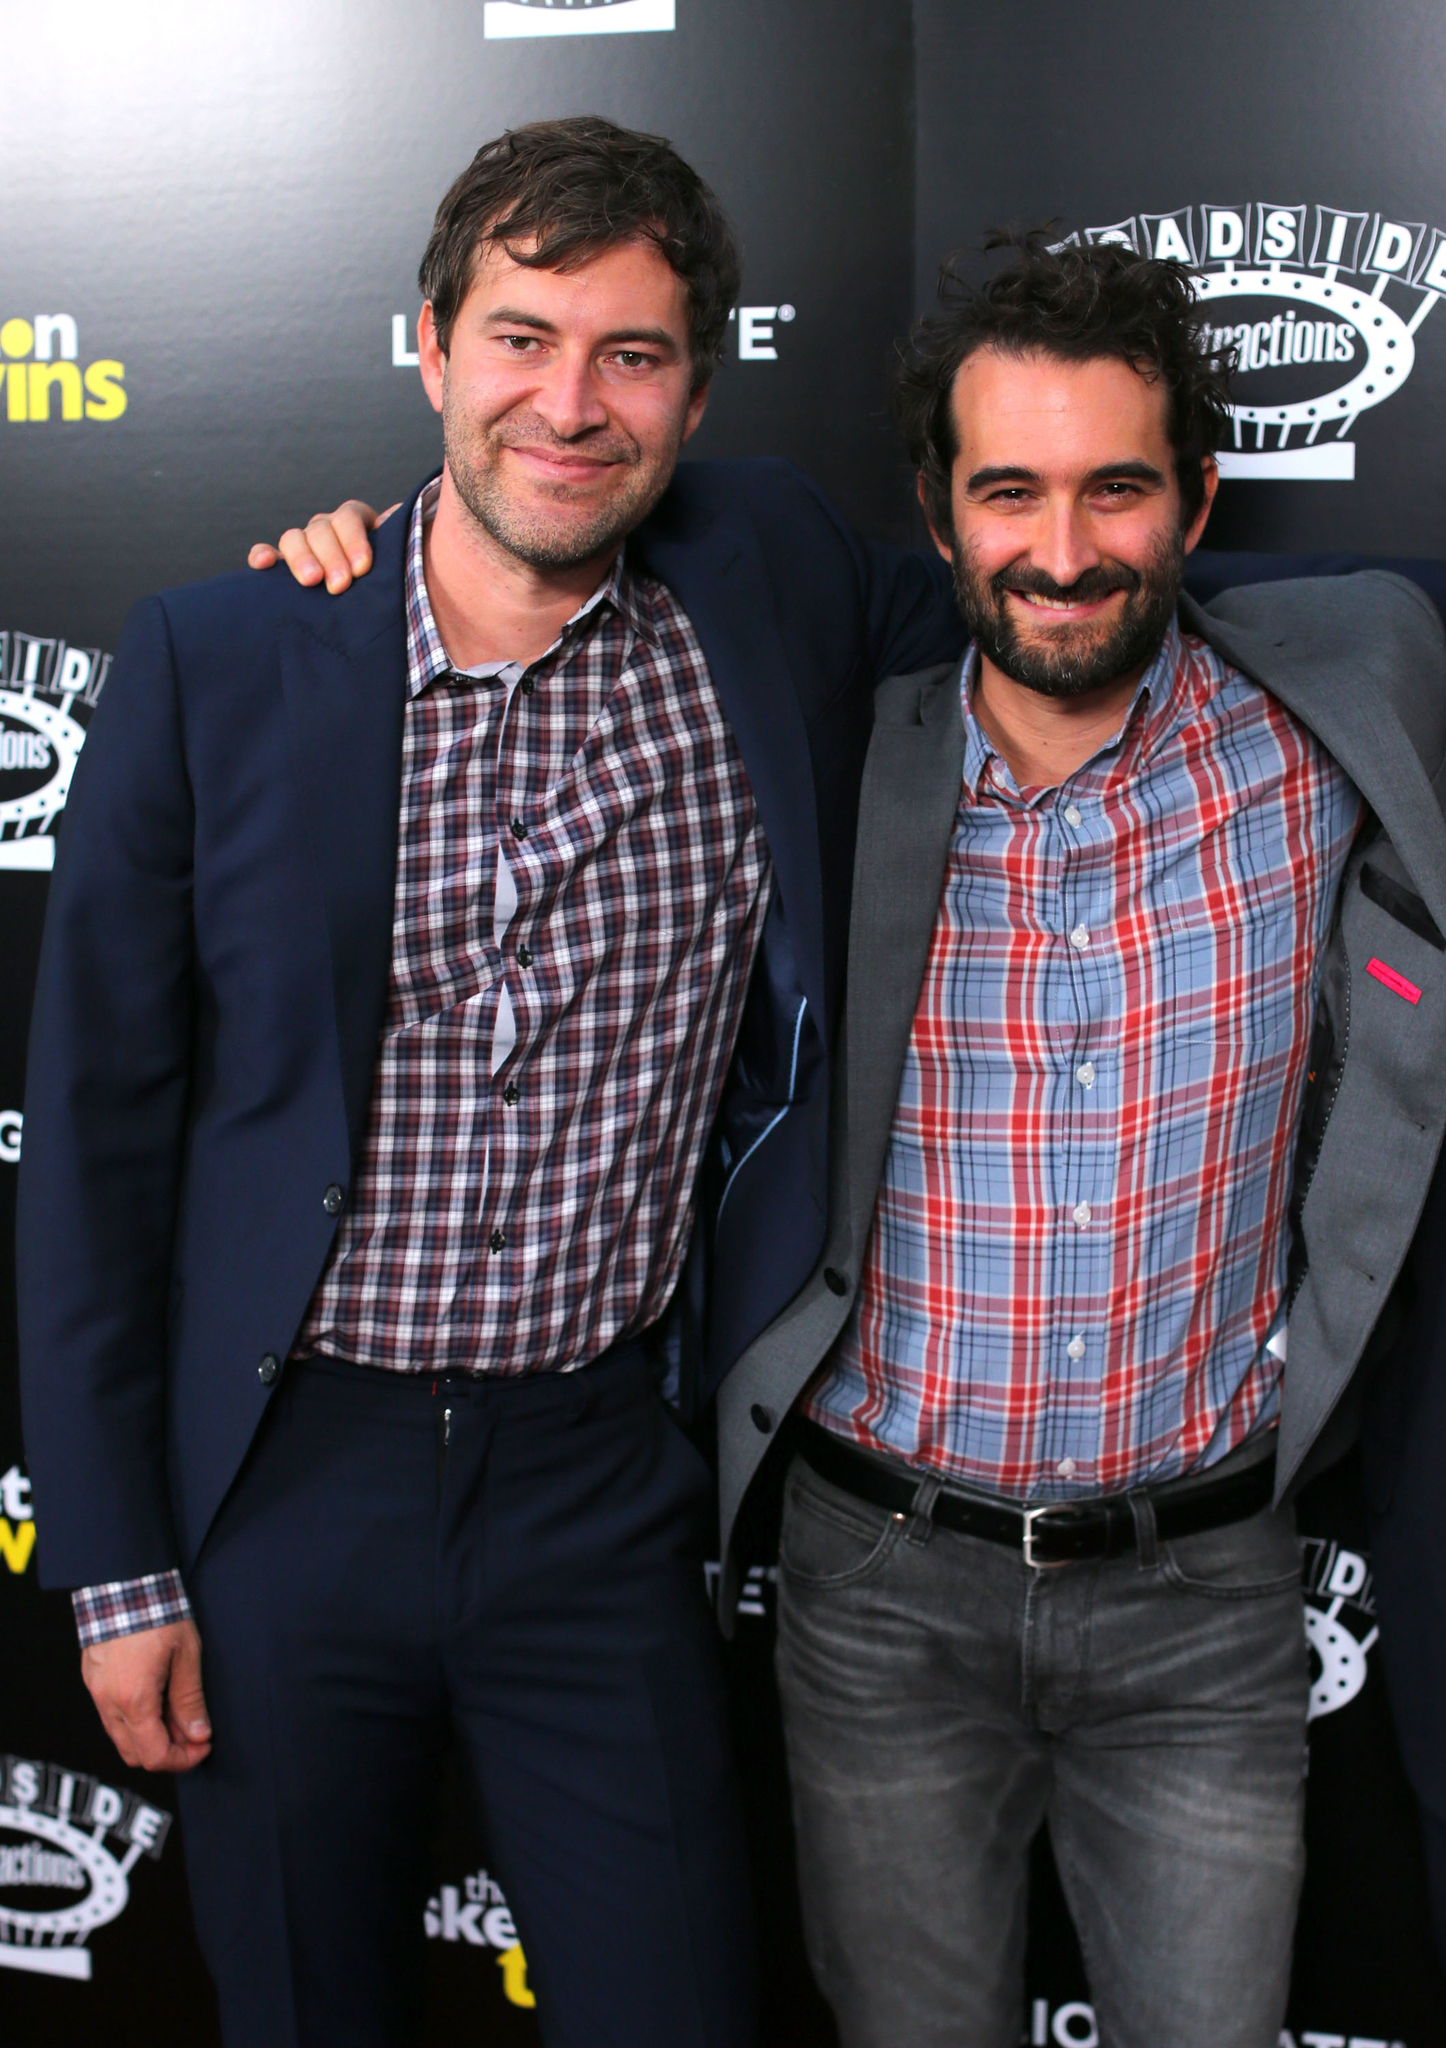 Jay Duplass and Mark Duplass at event of The Skeleton Twins (2014)